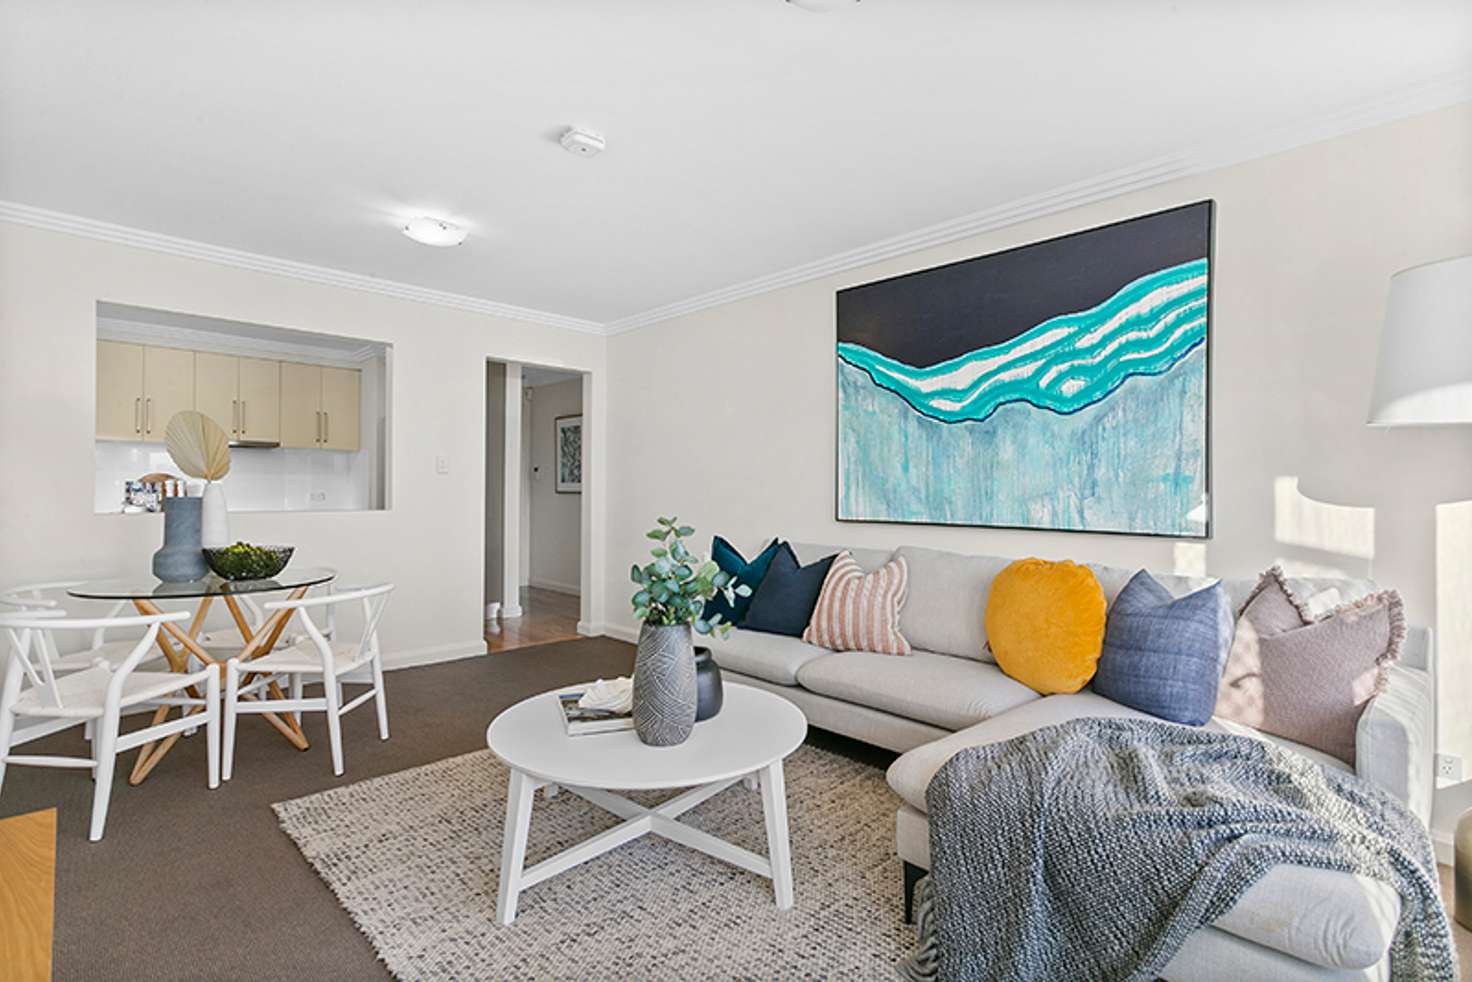 Main view of Homely apartment listing, 3/6-8 Mcekon Street, Maroubra NSW 2035